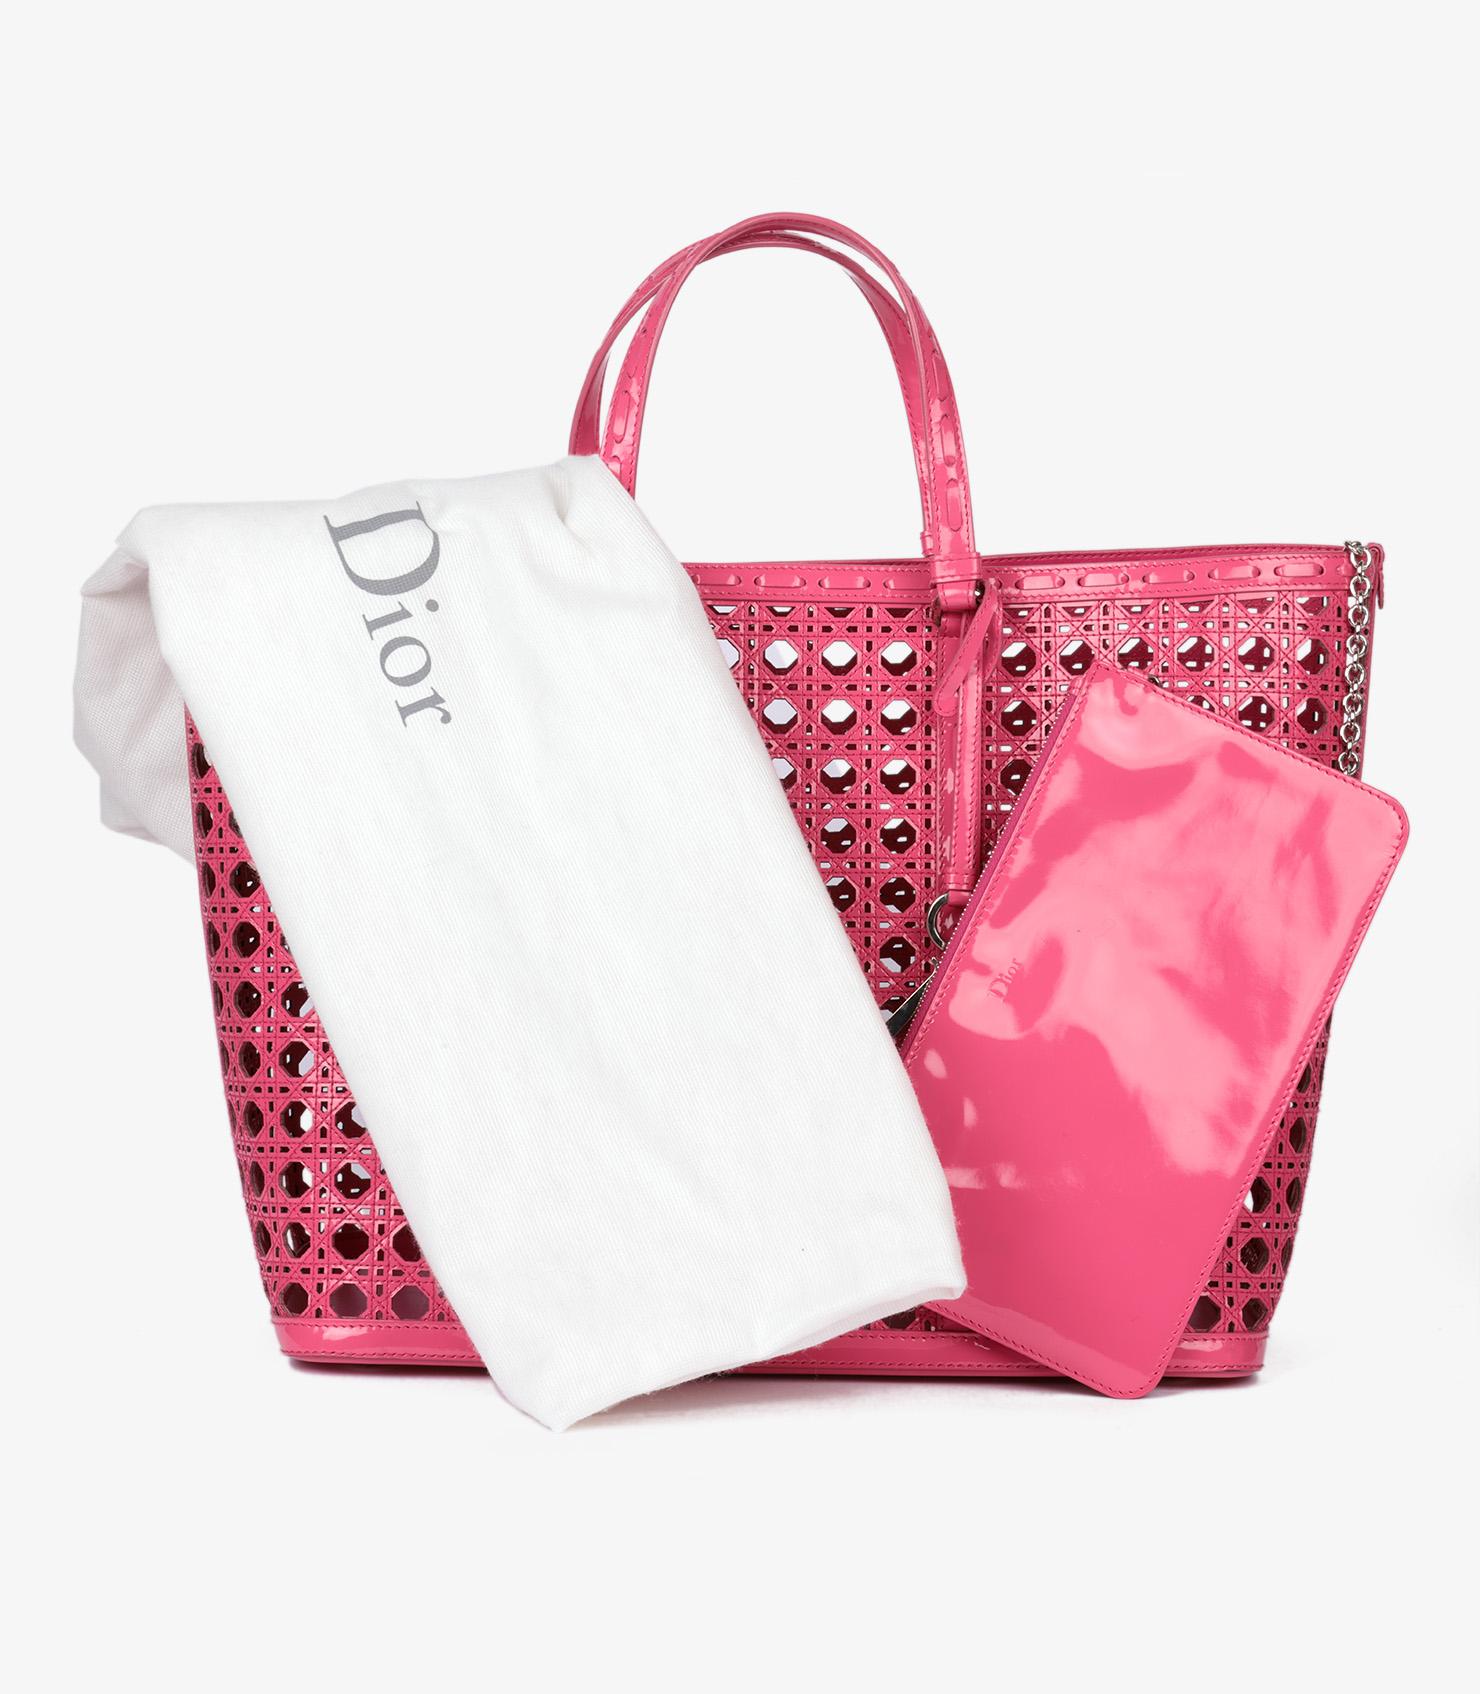 Christian Dior Pink Perforated Patent Leather Tote Bag For Sale 8